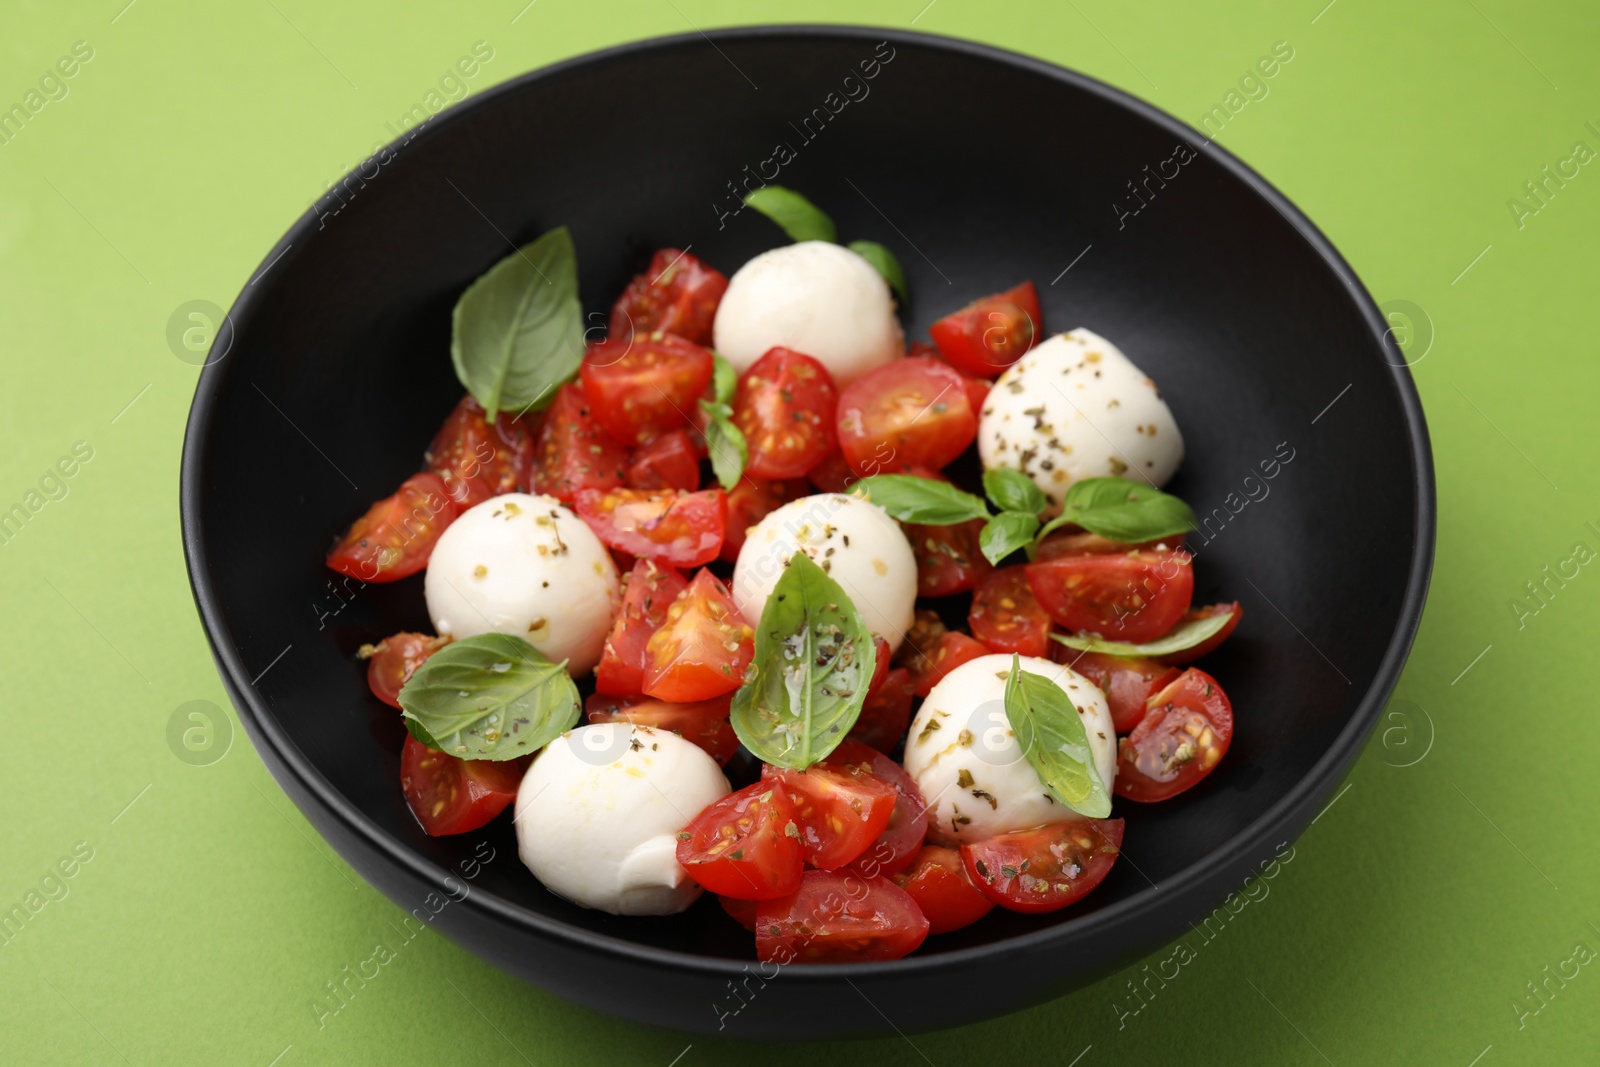 Photo of Tasty Caprese salad with tomatoes, mozzarella balls and basil on green background, closeup